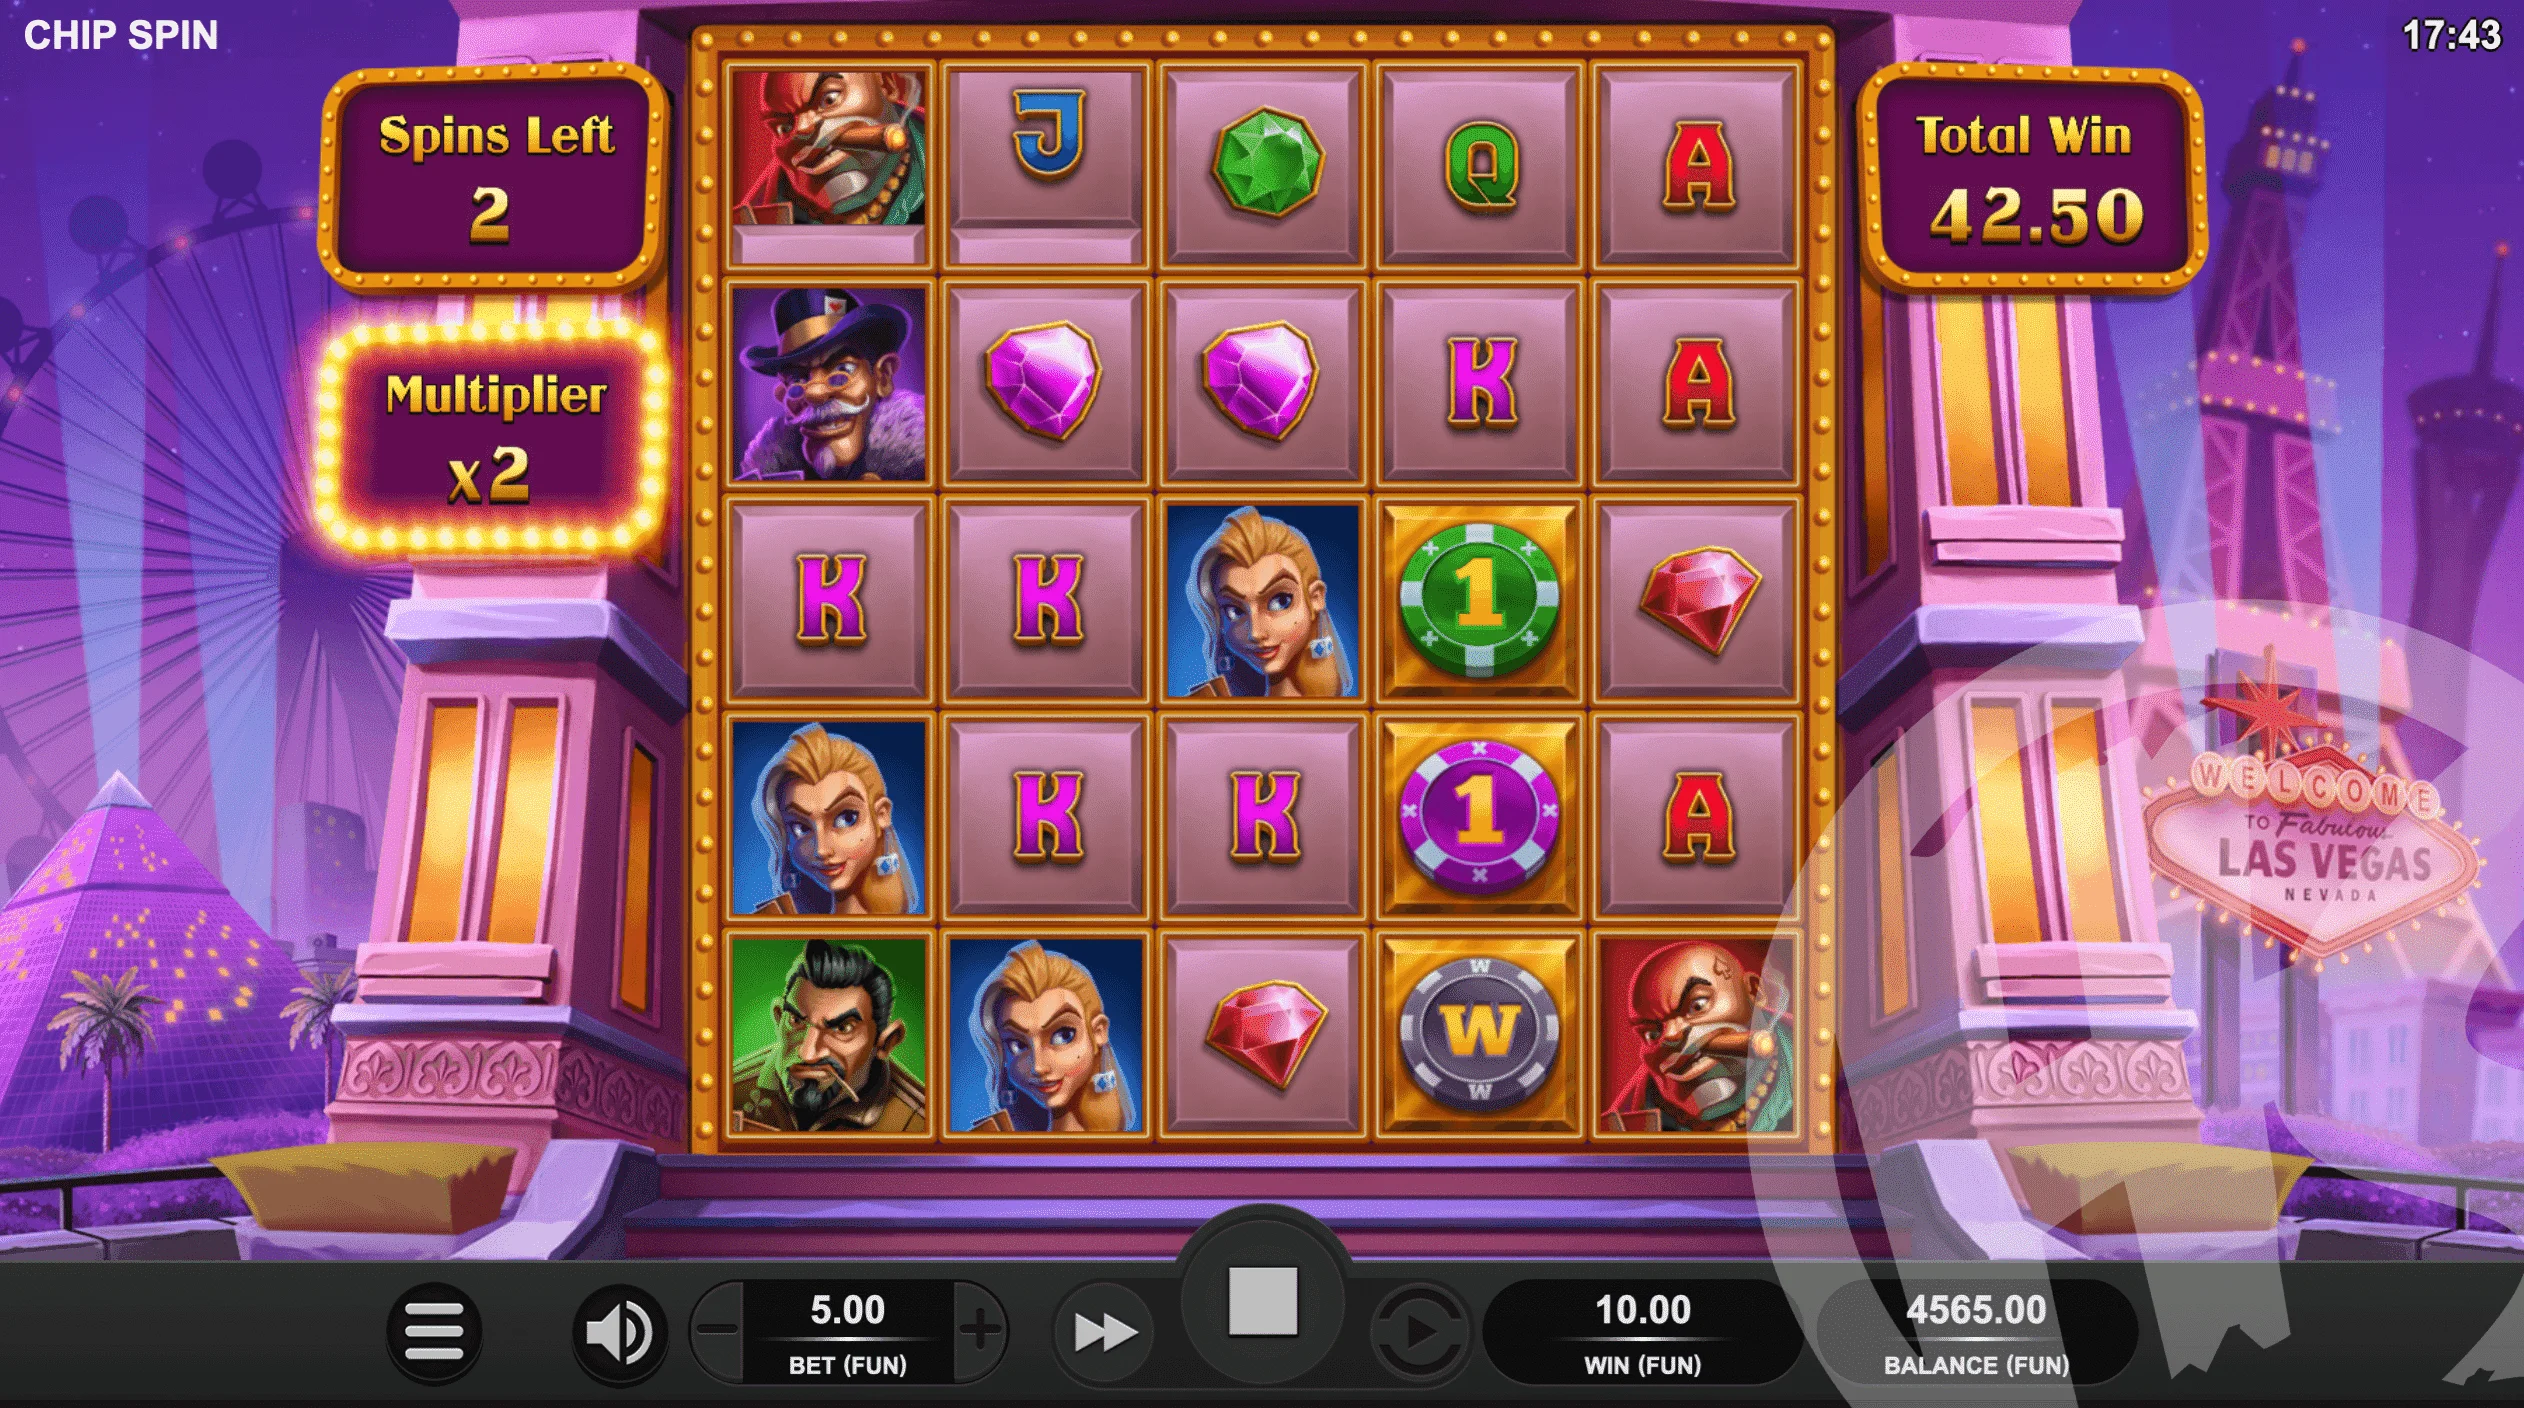 Chip Spin Free Spins